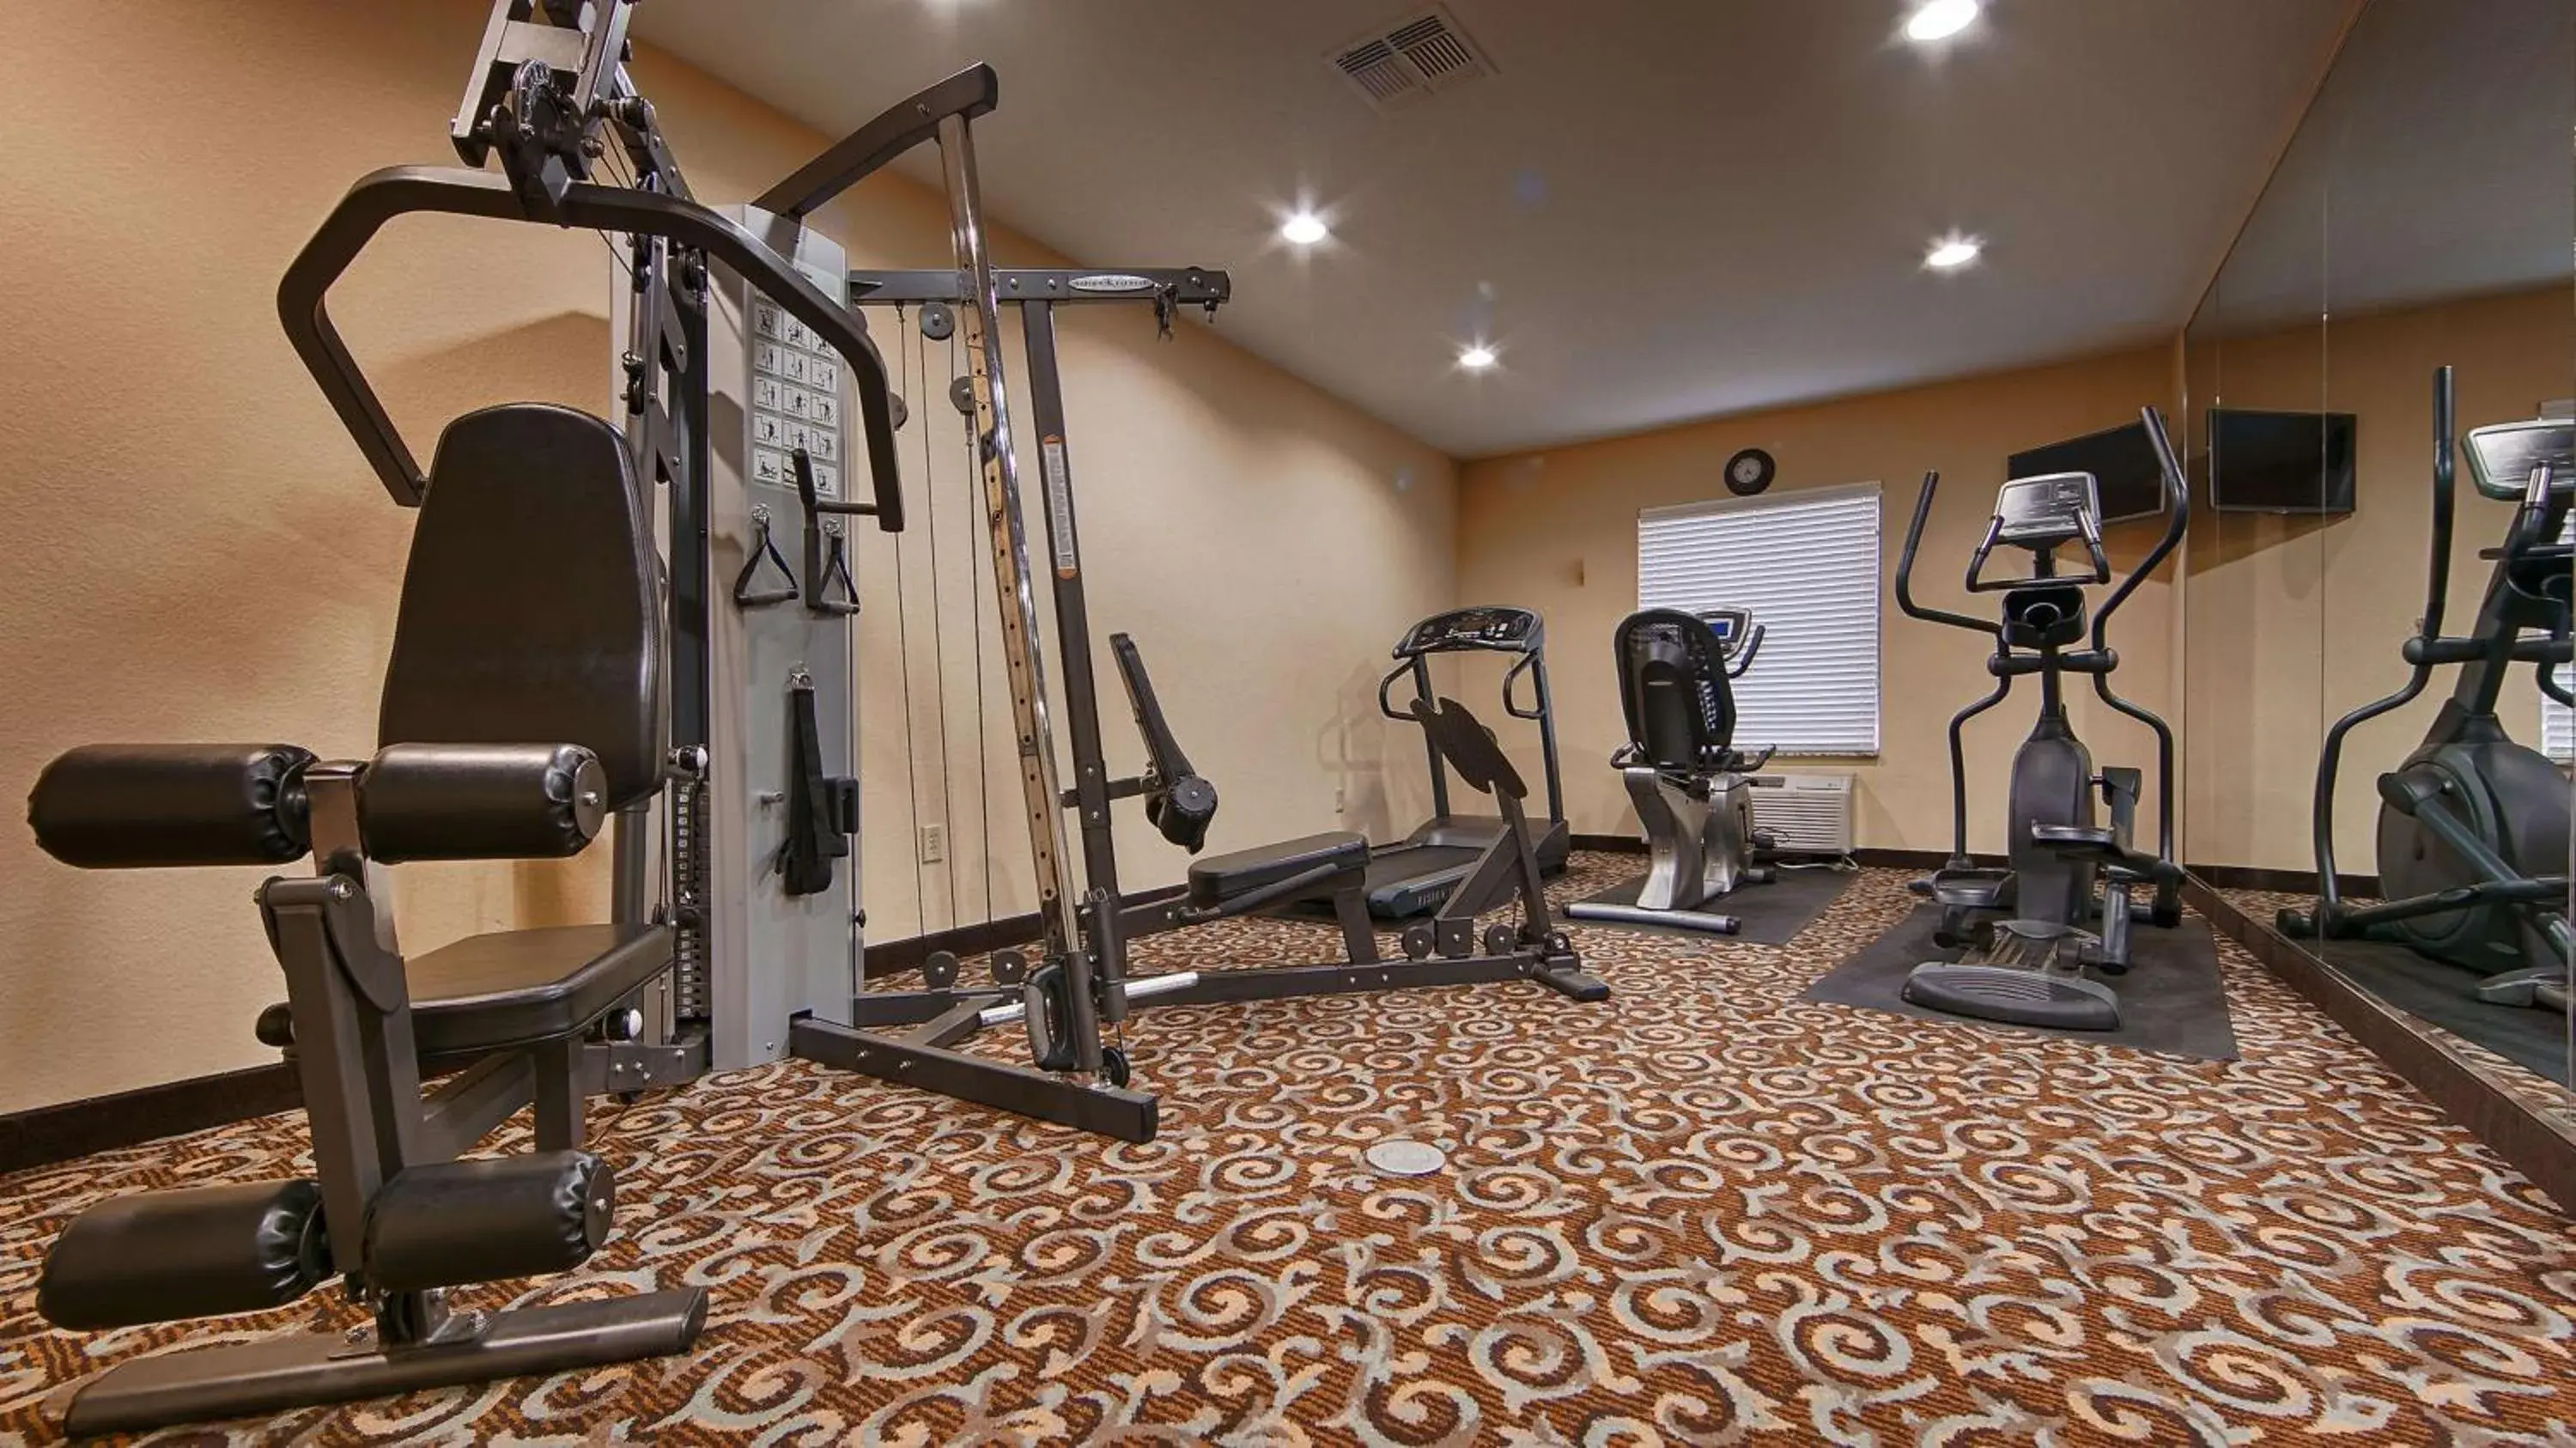 Fitness centre/facilities, Fitness Center/Facilities in Best Western Bastrop Pines Inn